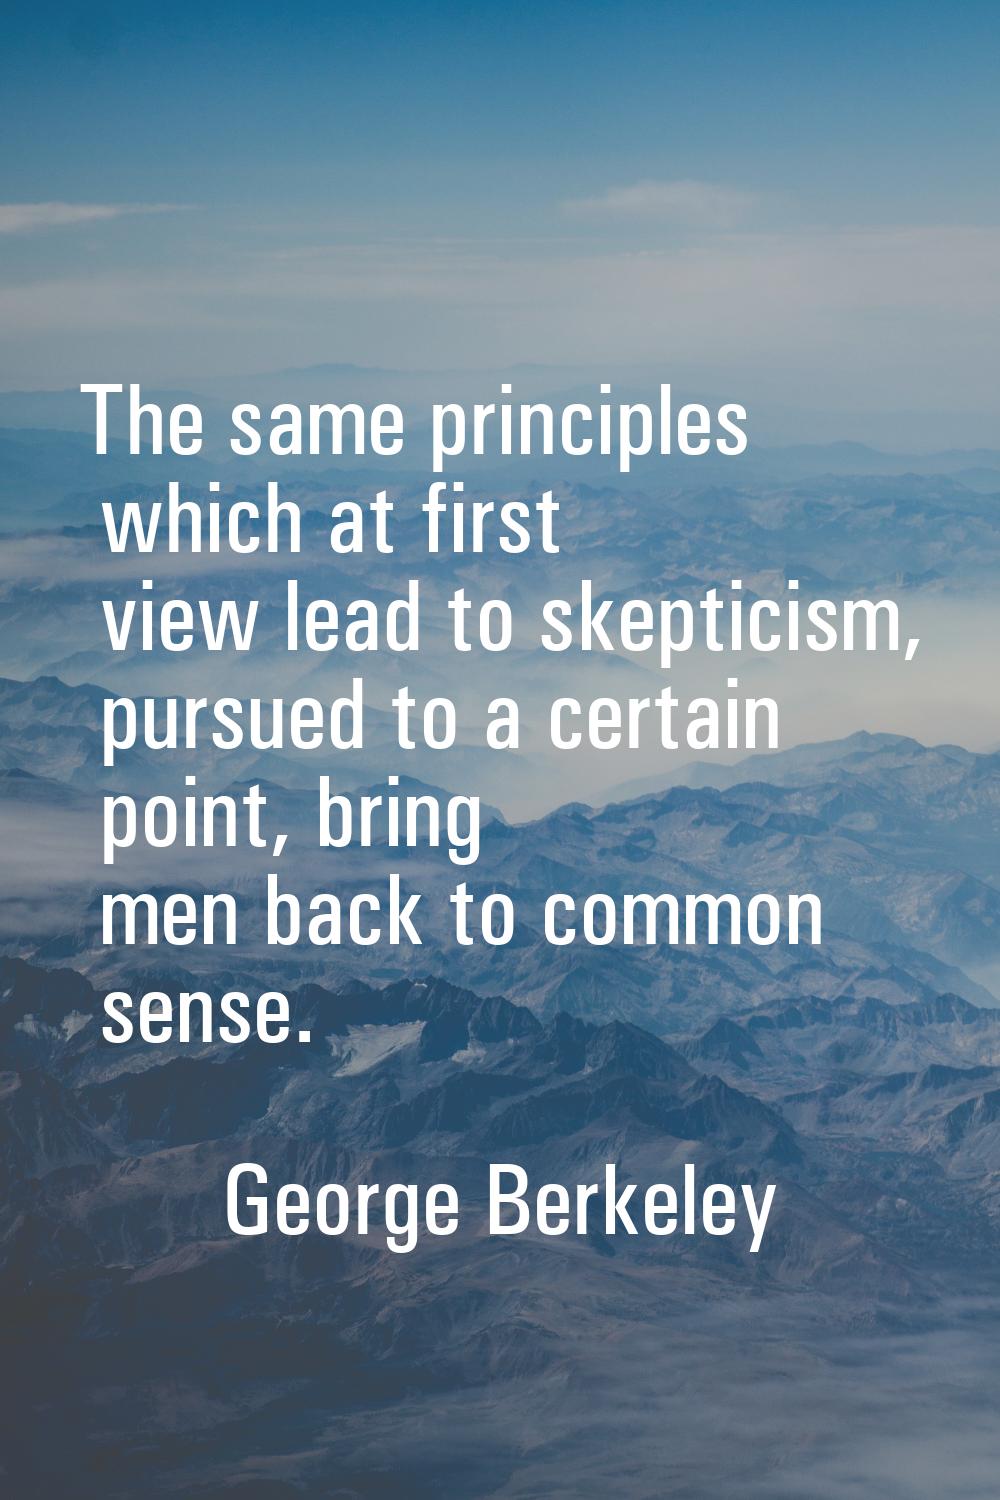 The same principles which at first view lead to skepticism, pursued to a certain point, bring men b